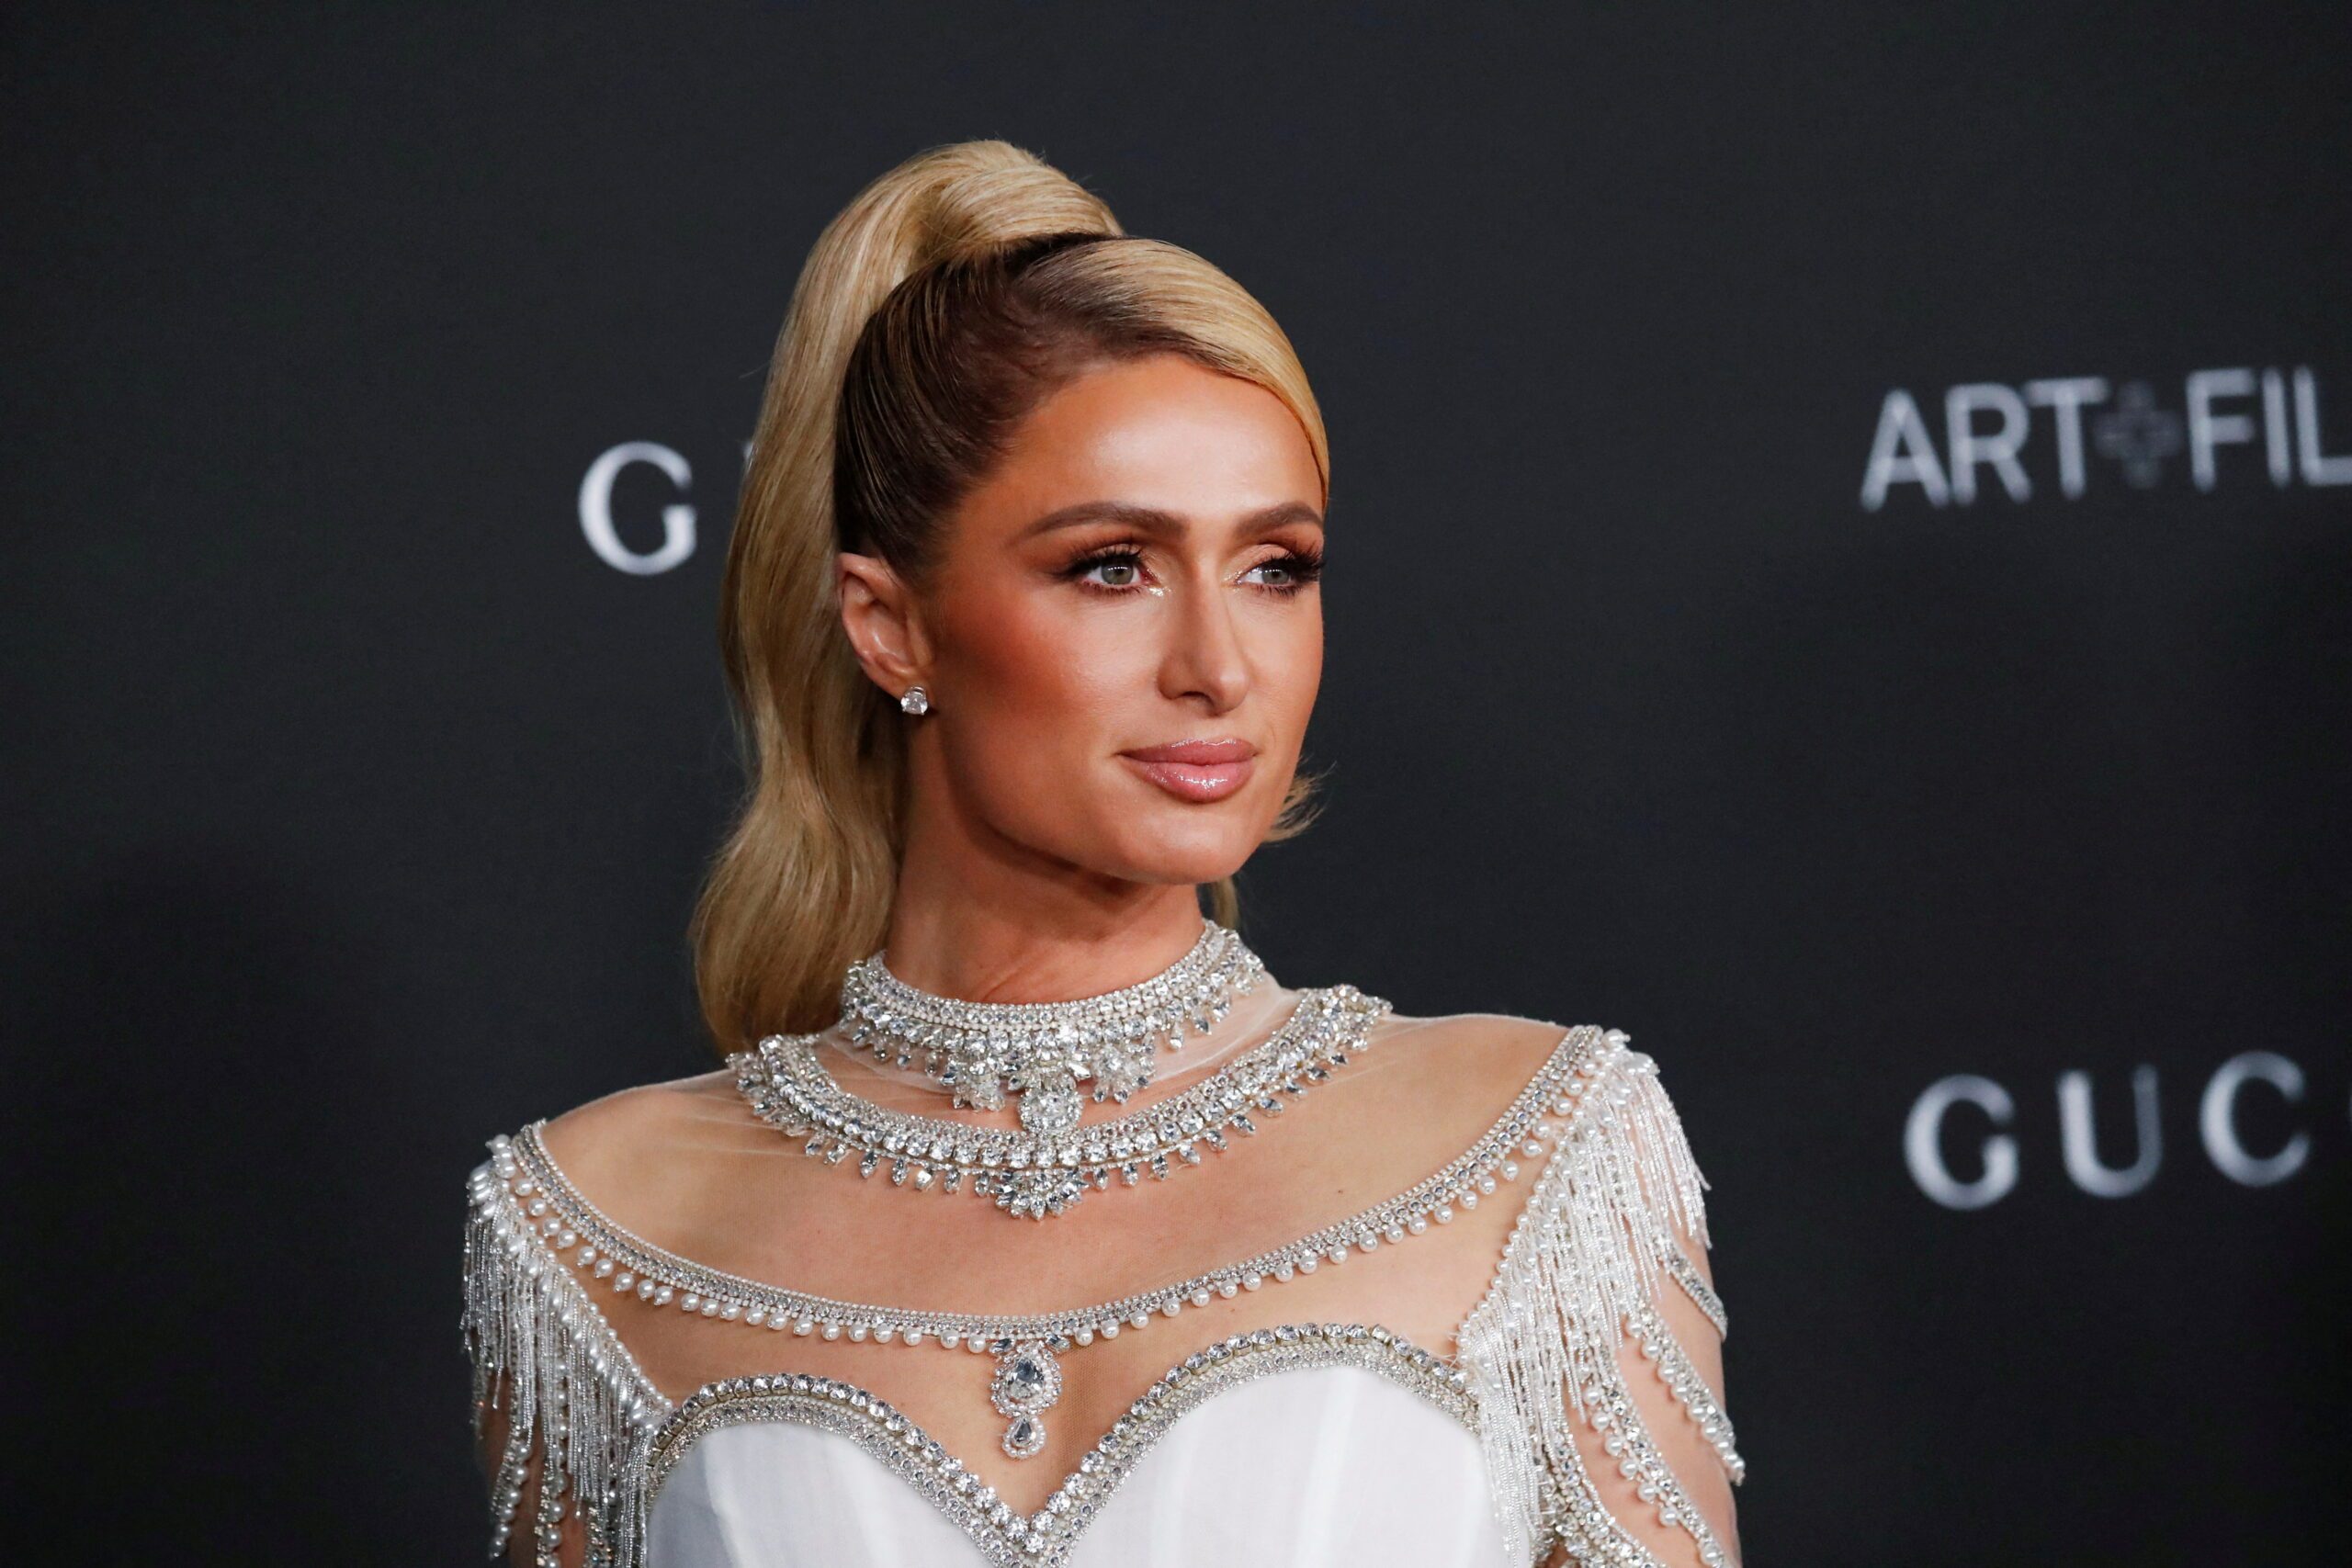 US reality TV star Paris Hilton launches metaverse business on Roblox